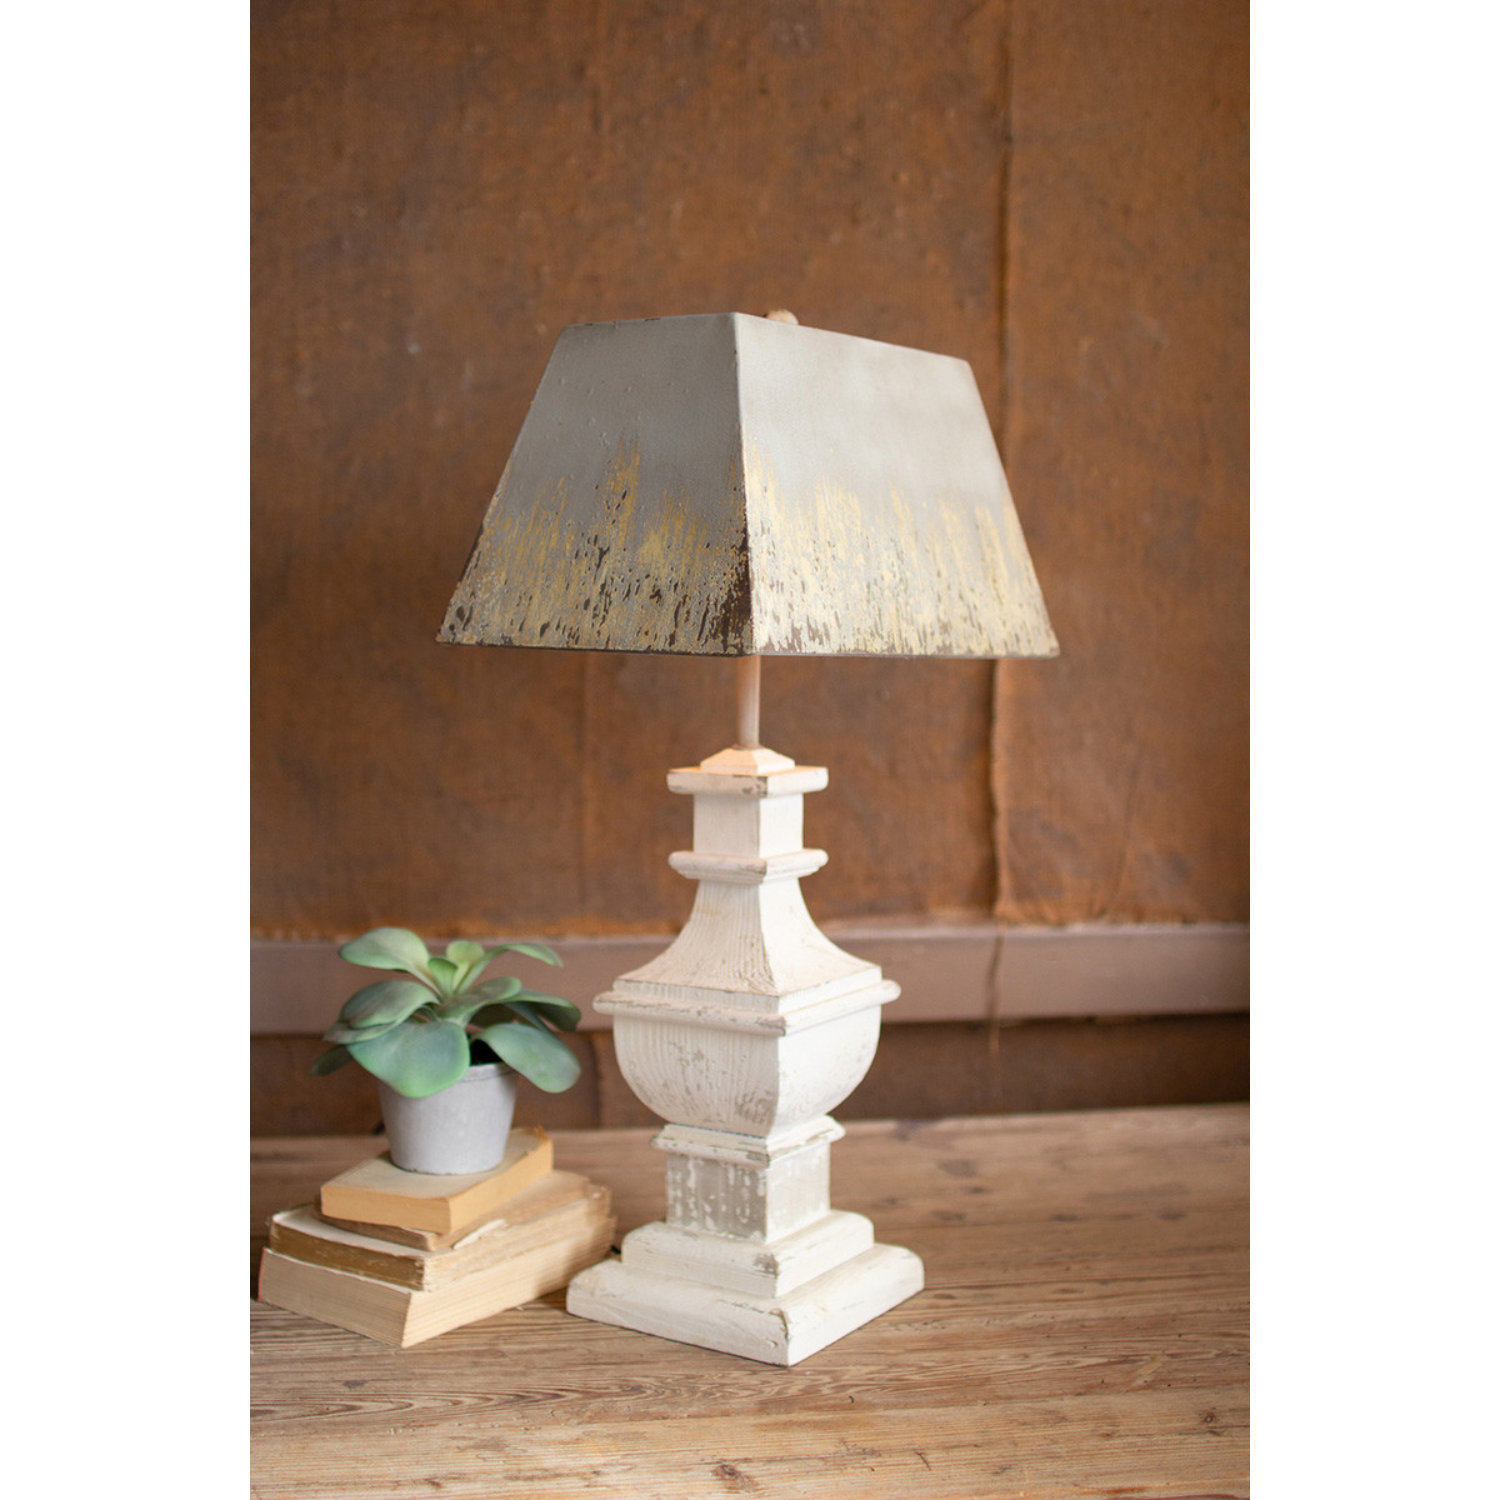 Tall Antique Brass Table Lamp With Brass Shade by Kalalou